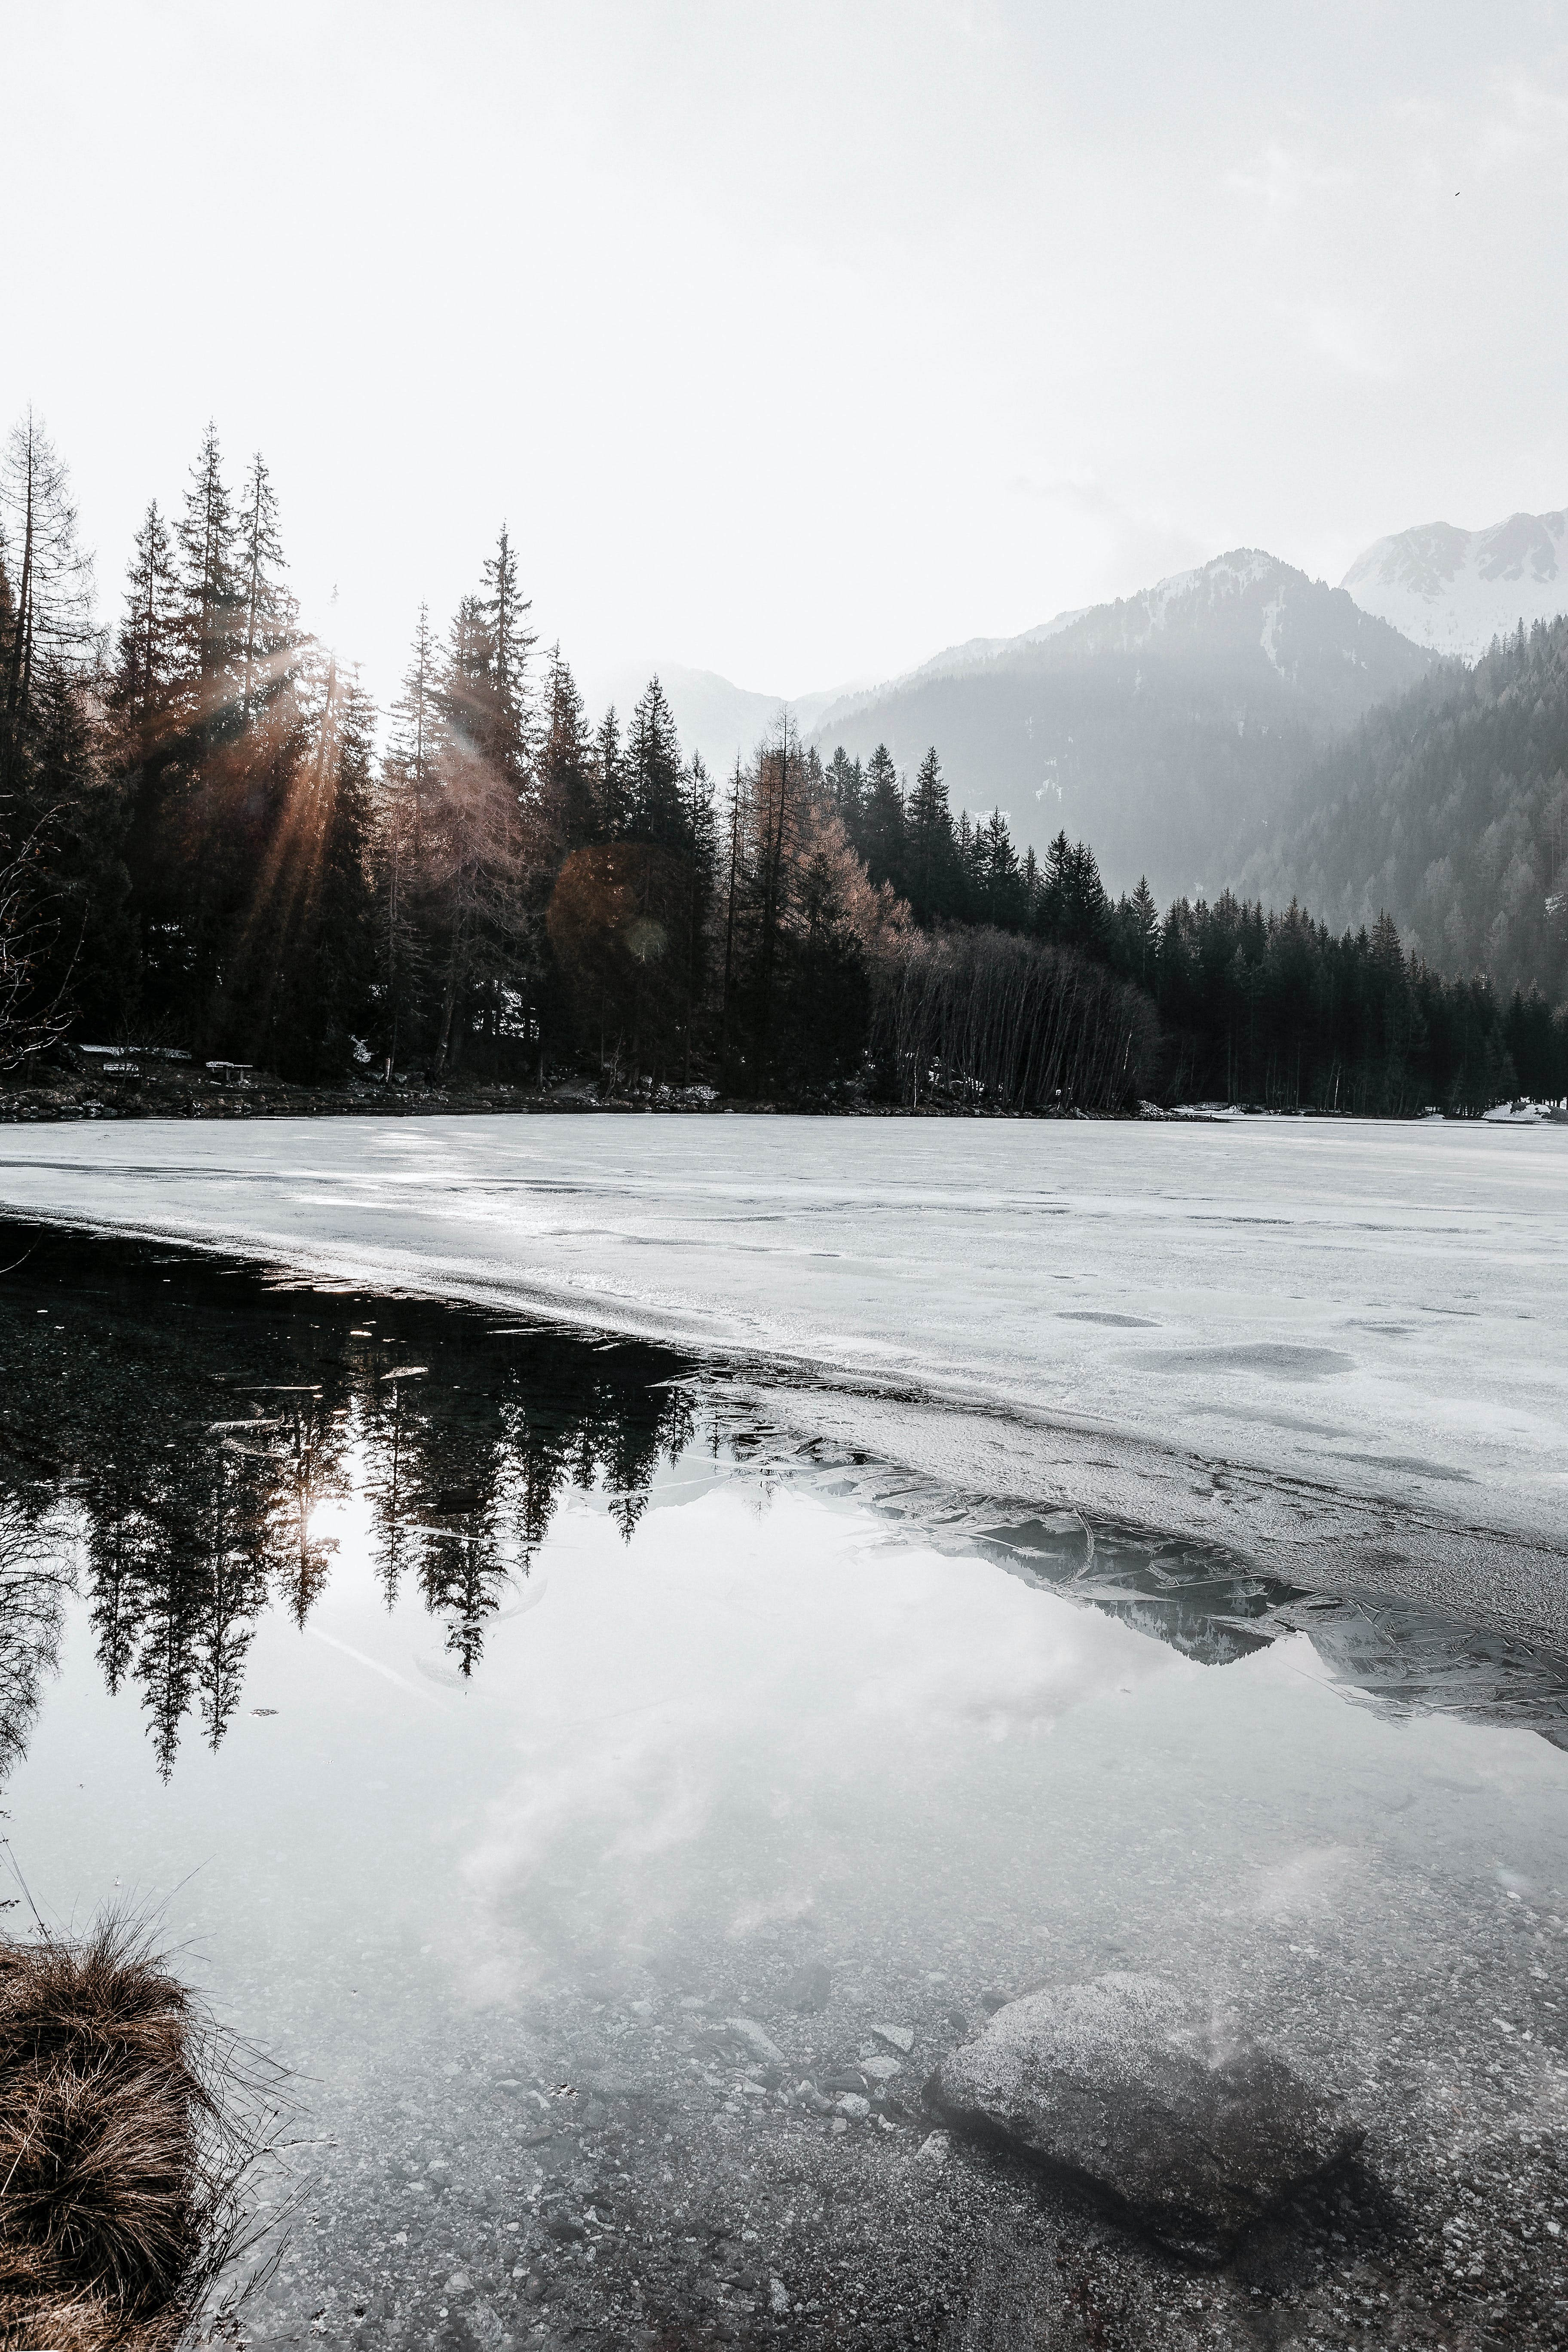 A frozen lake surrounded by trees with mountains in the background. - Lake